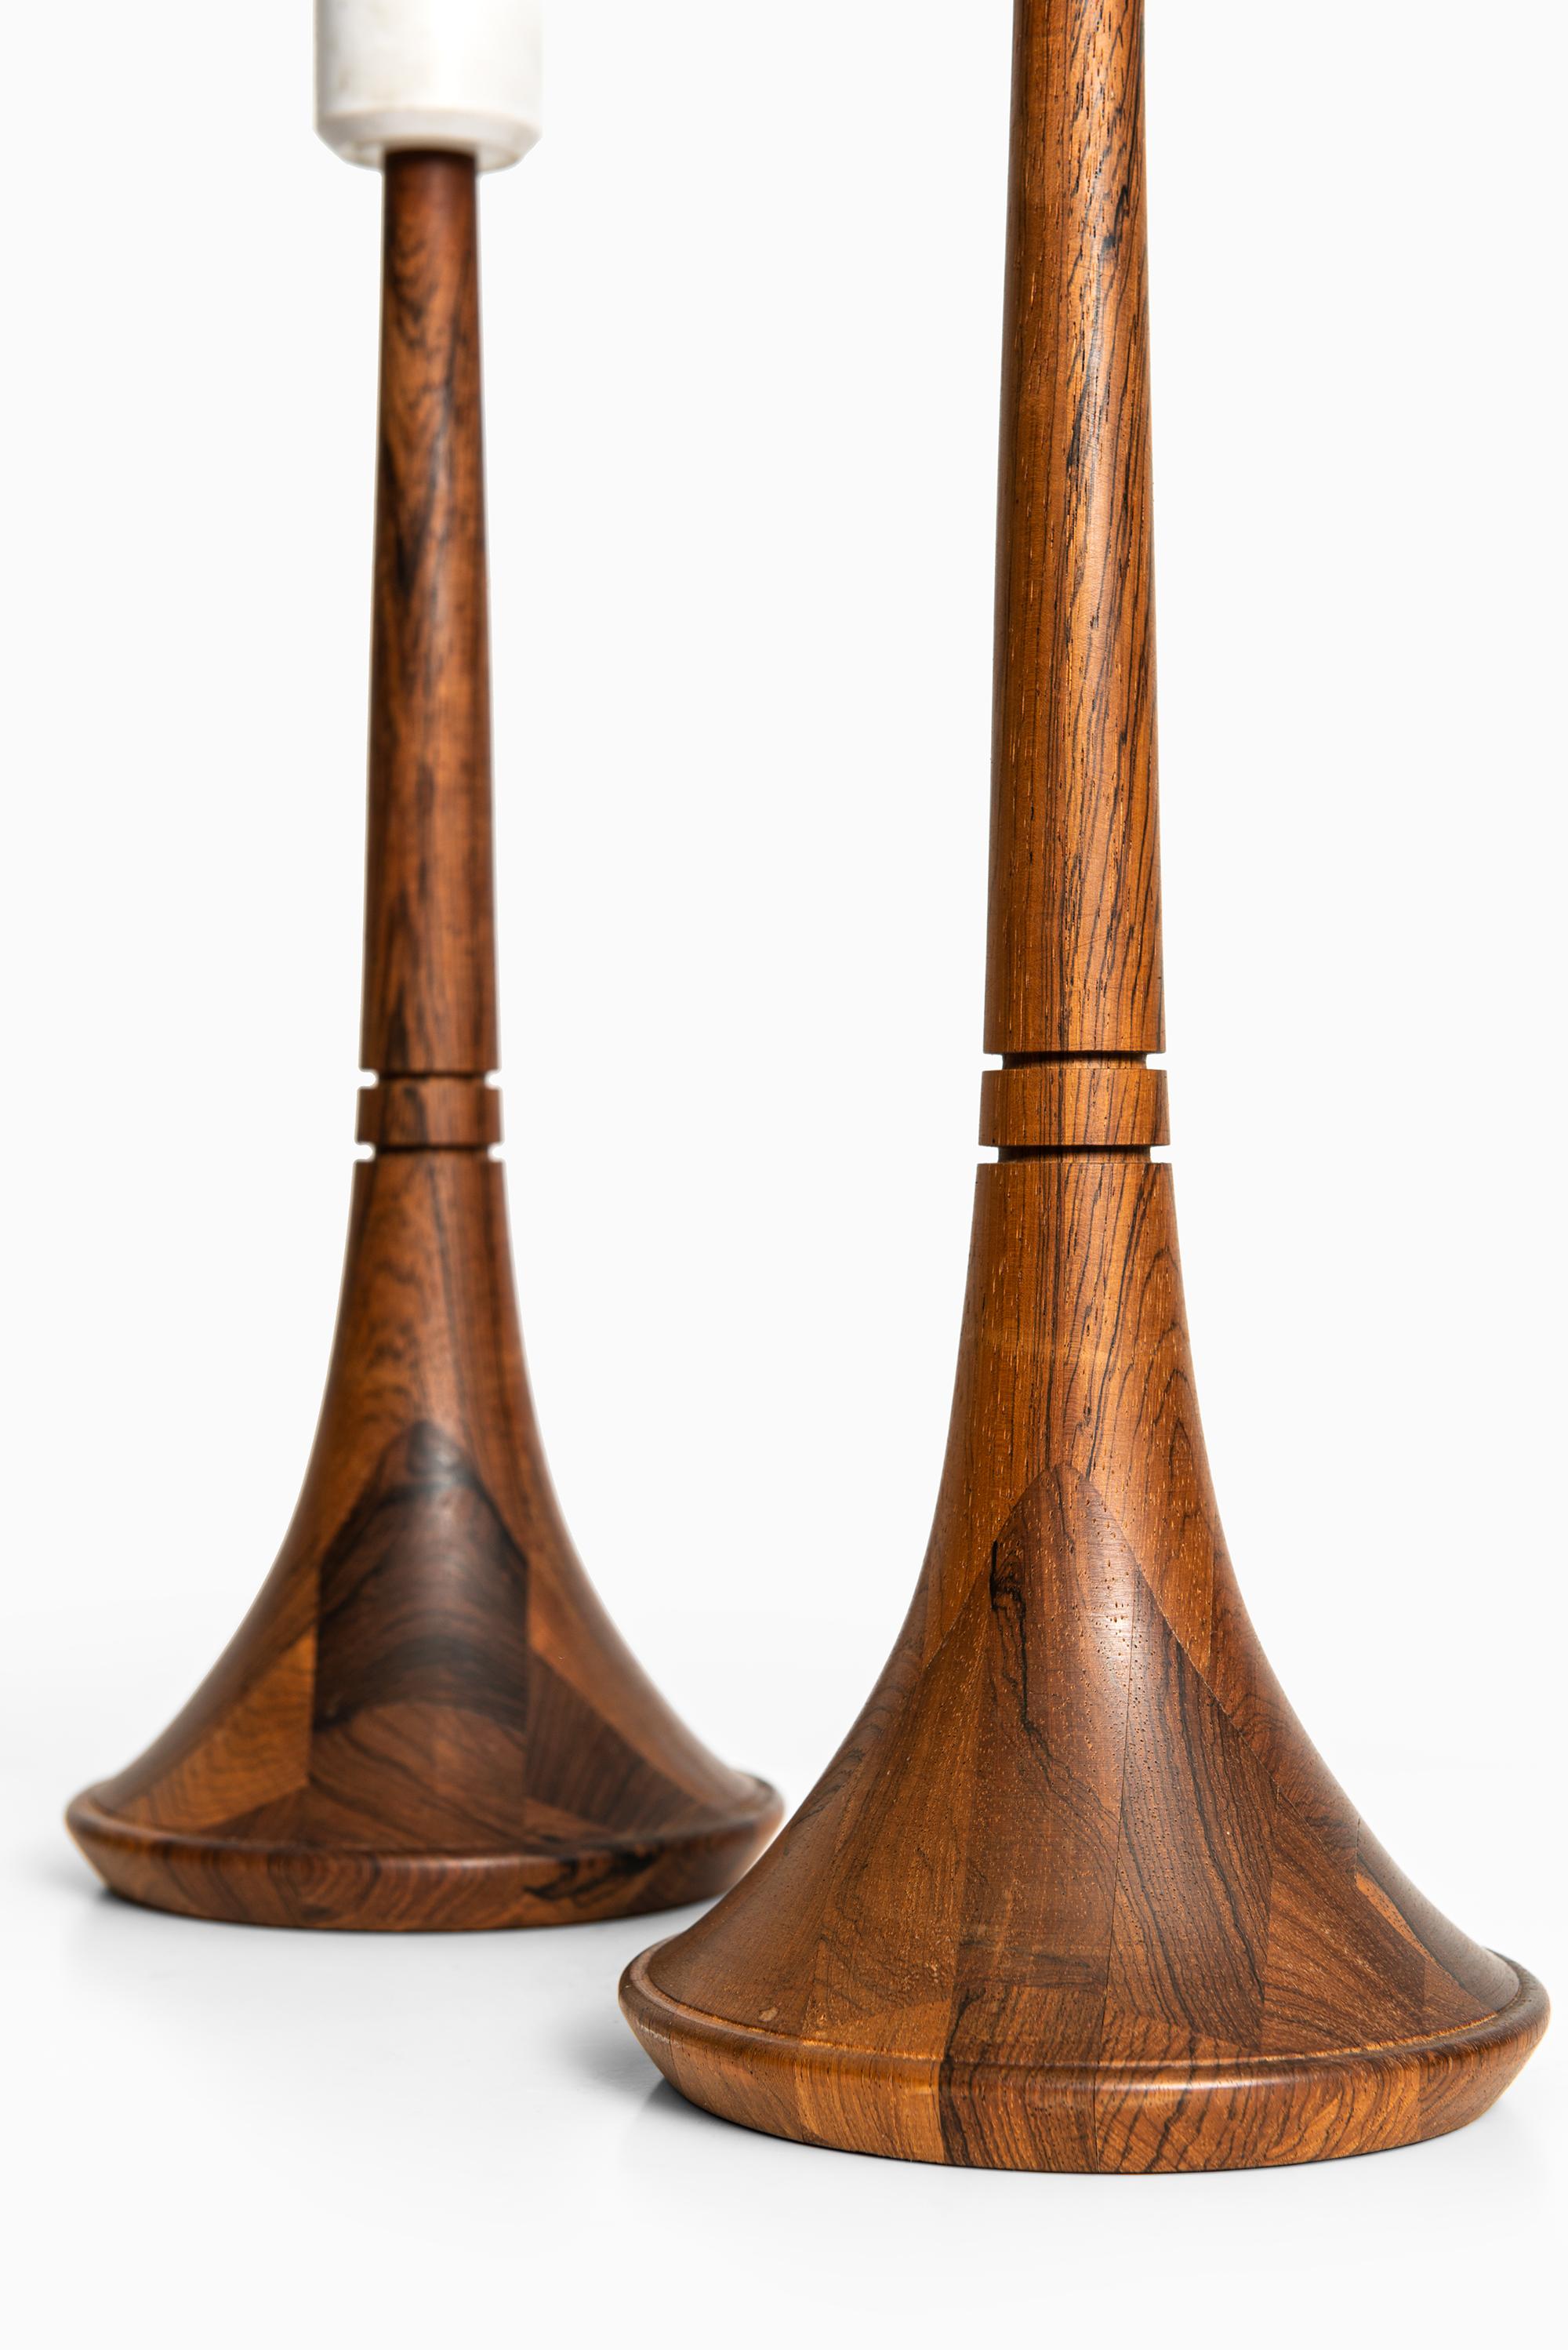 Rare pair of table lamps. Produced by AB Stilarmatur in Sweden. Please note: These will be sold without any lamp shades.